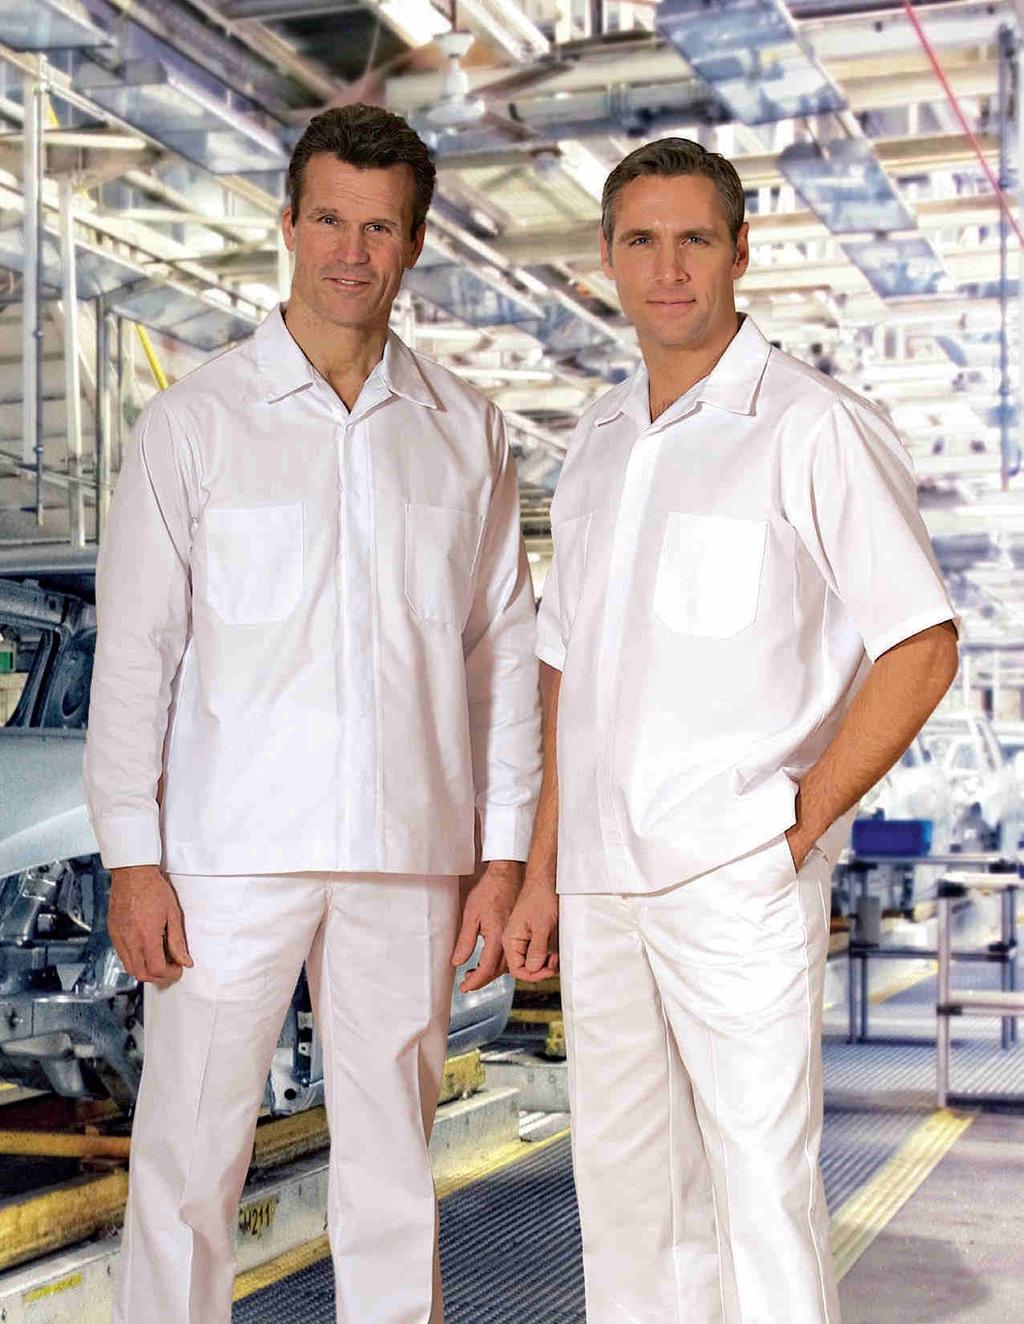 WORK SHIRTS 2340/2809 2290 Automotive shirt A new variation on a respected classic that s long been a favorite in automotive plants.